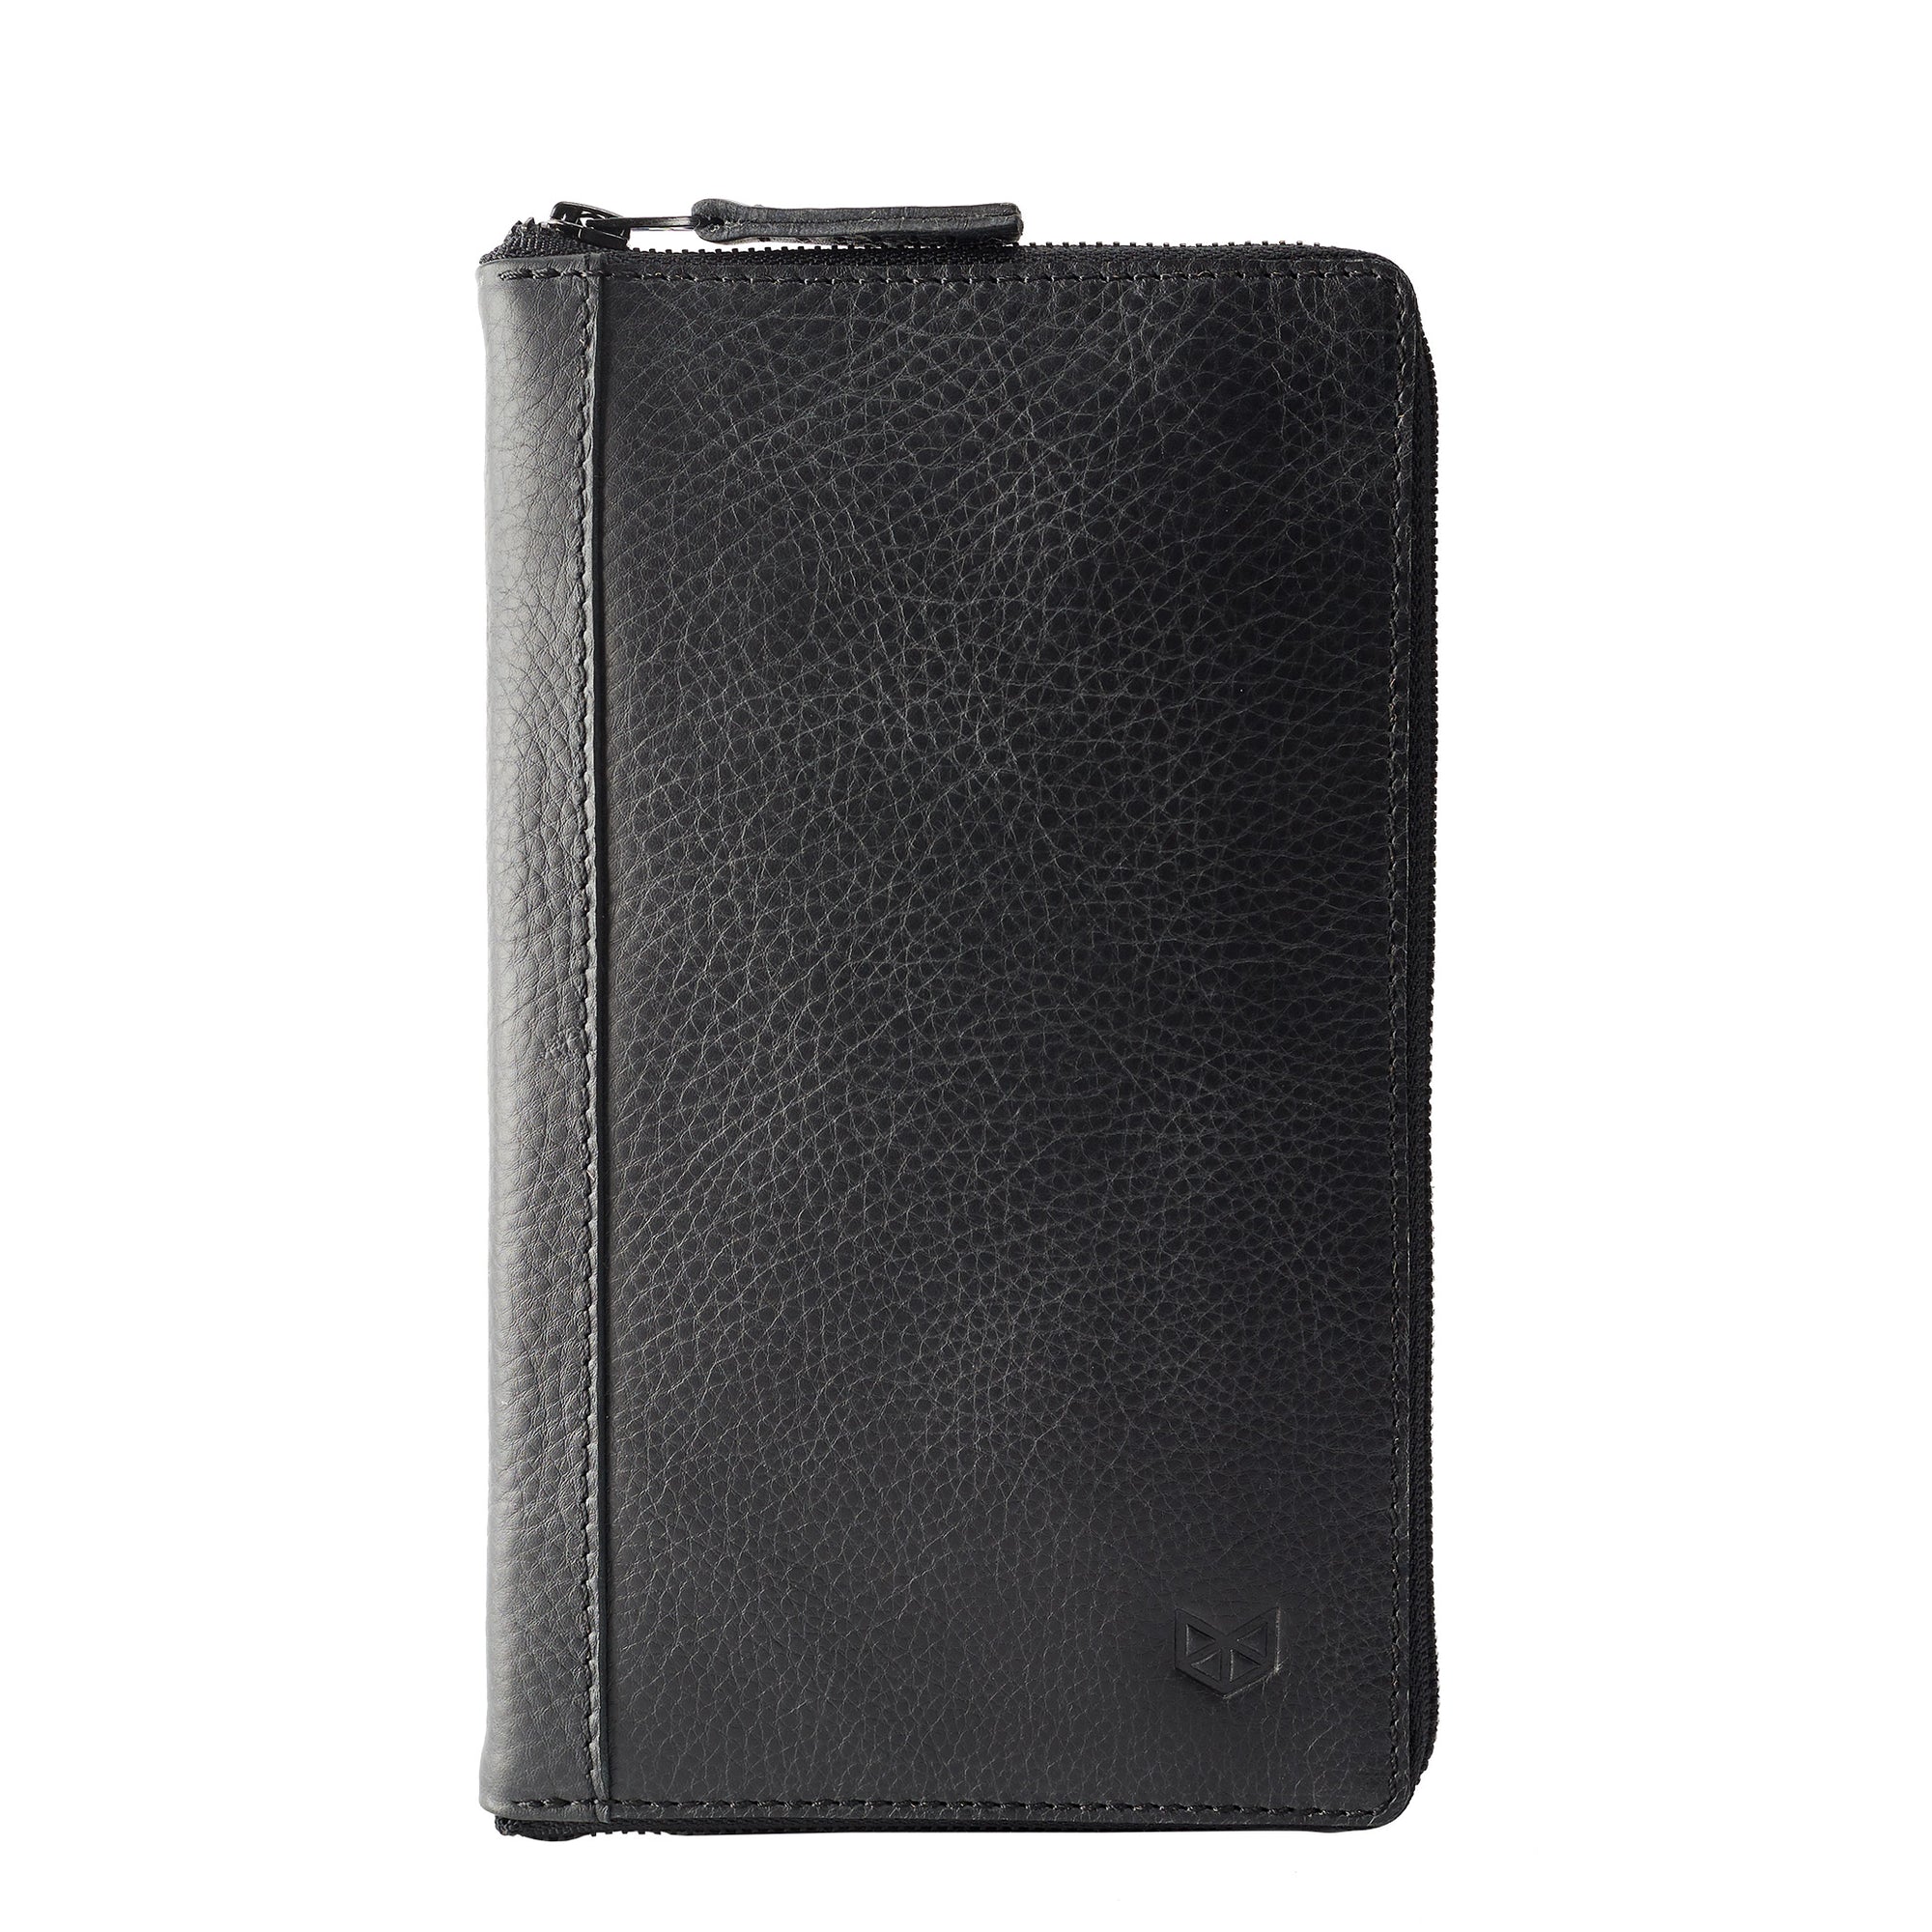 Front. Black Passport Holder for travelers, document organizer, travel journal by Capra Leather